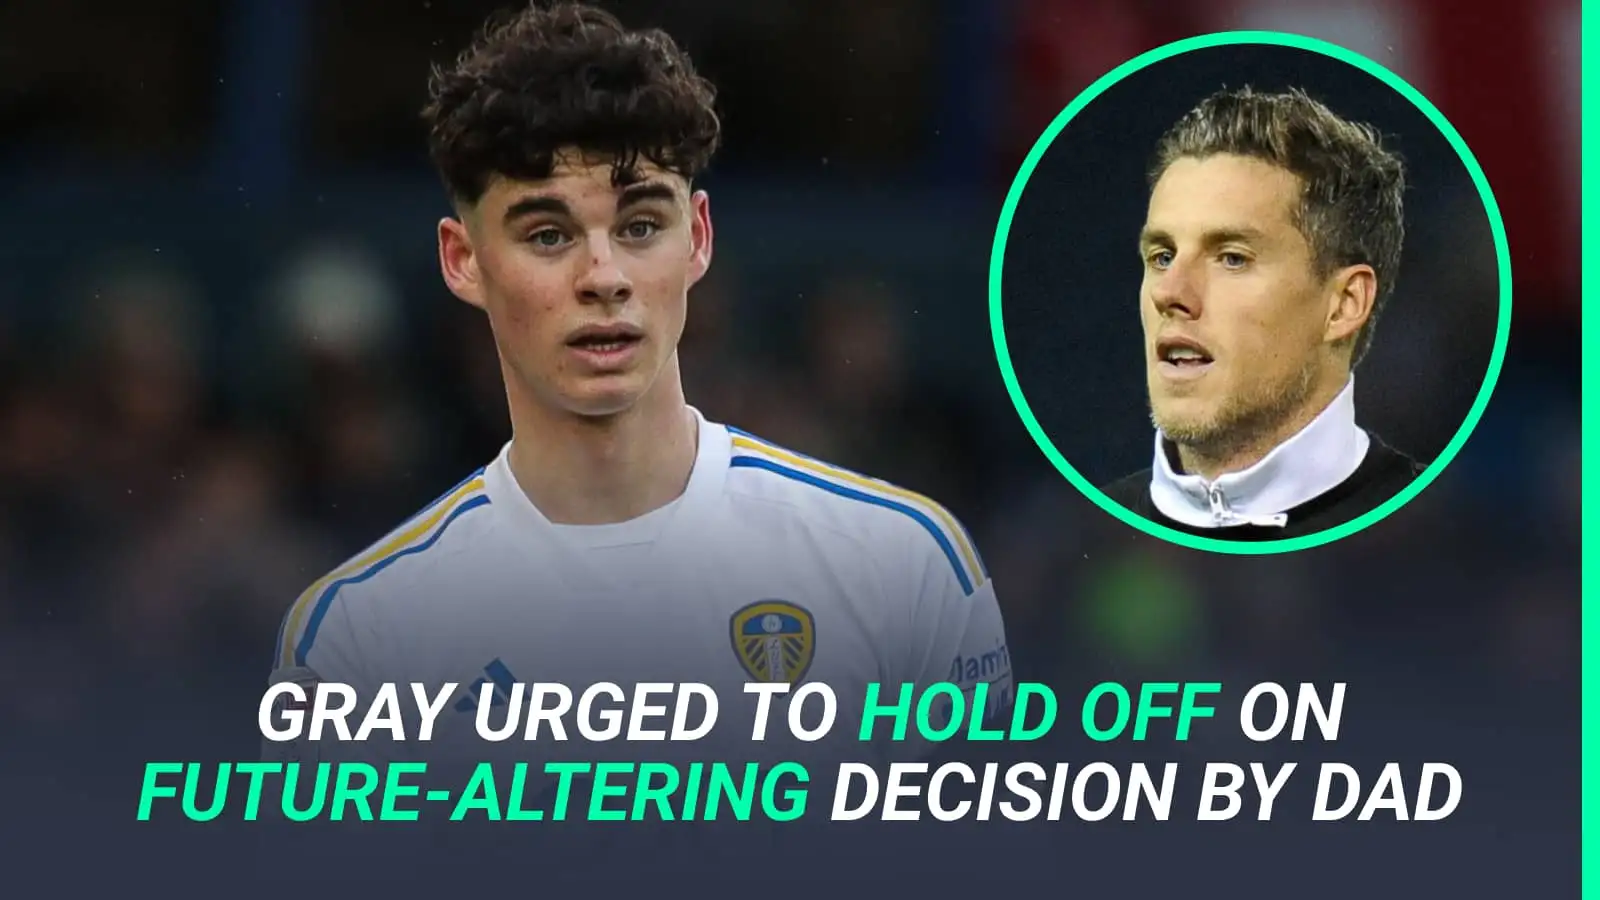 Major Archie Gray approach to be rejected as family urge Leeds starlet against following their path for now